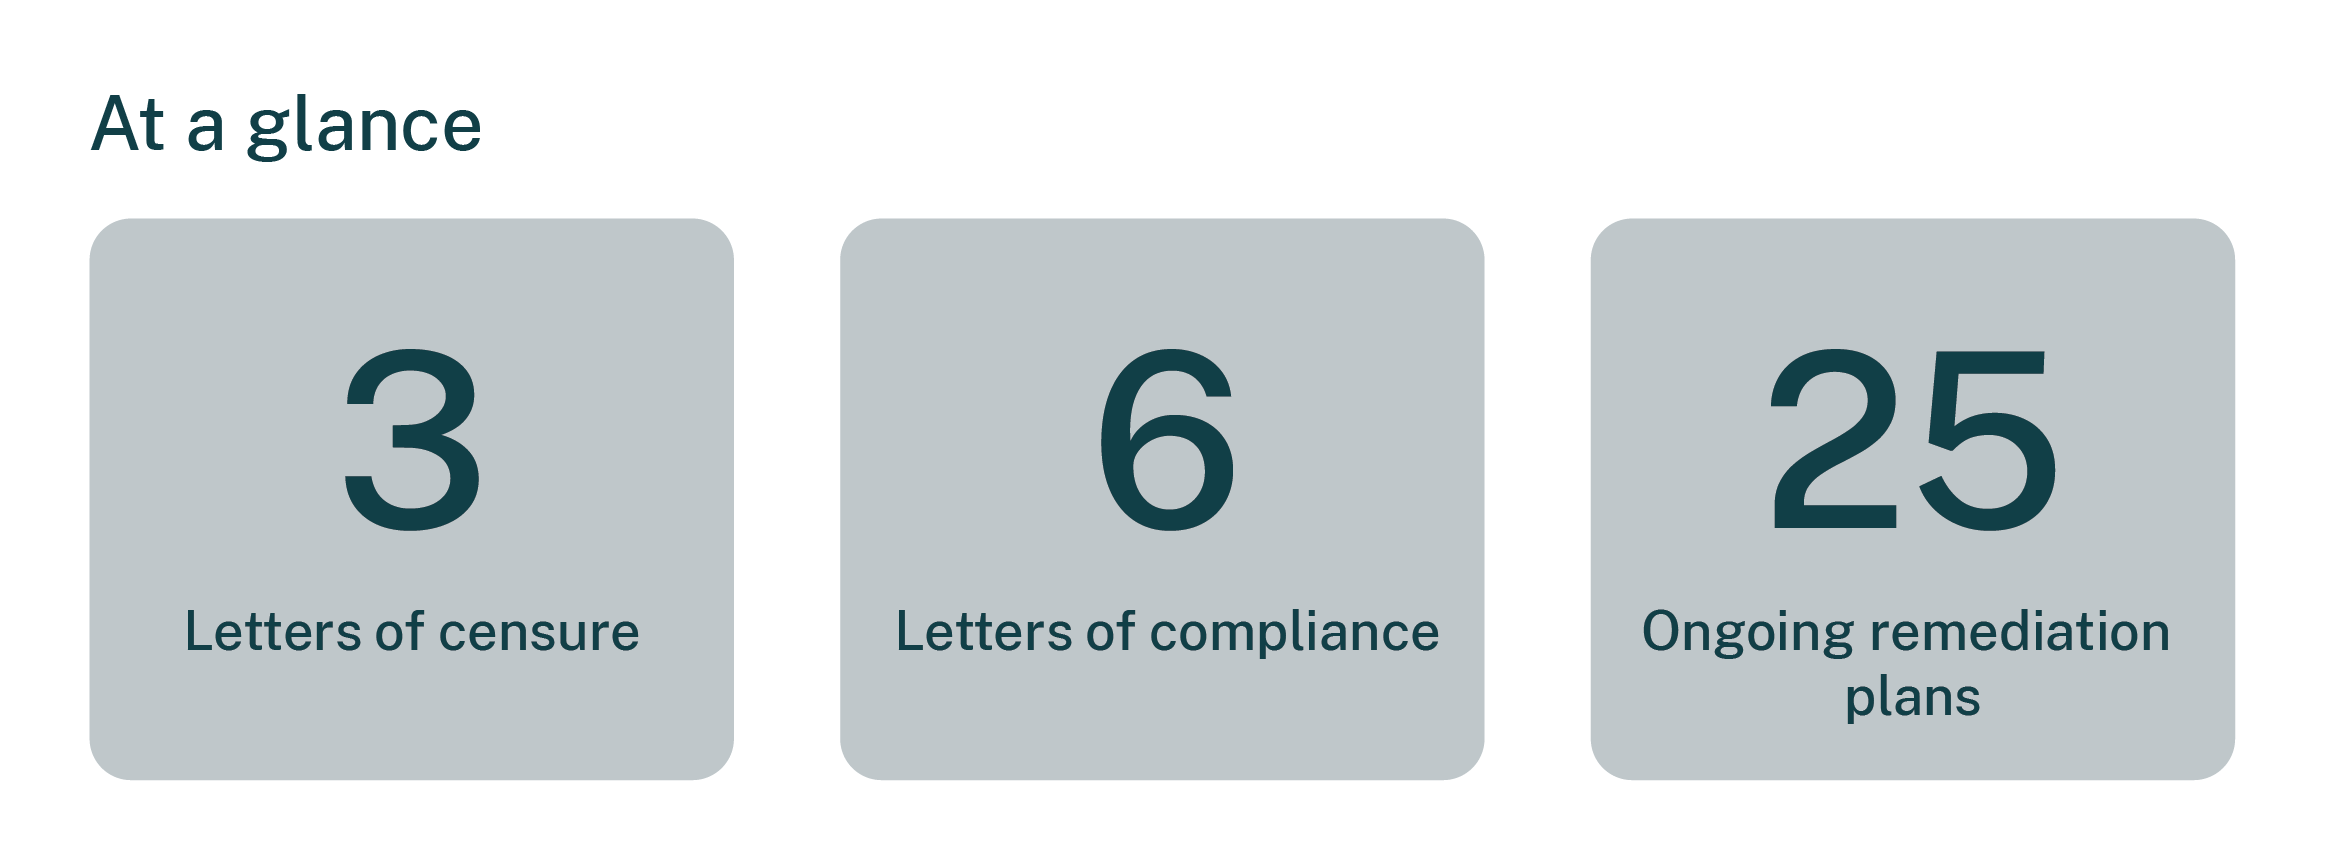 At a glance, SIRA issued 3 letters of censure and 6 letters of compliance. There are 25 ongoing remediation plans.